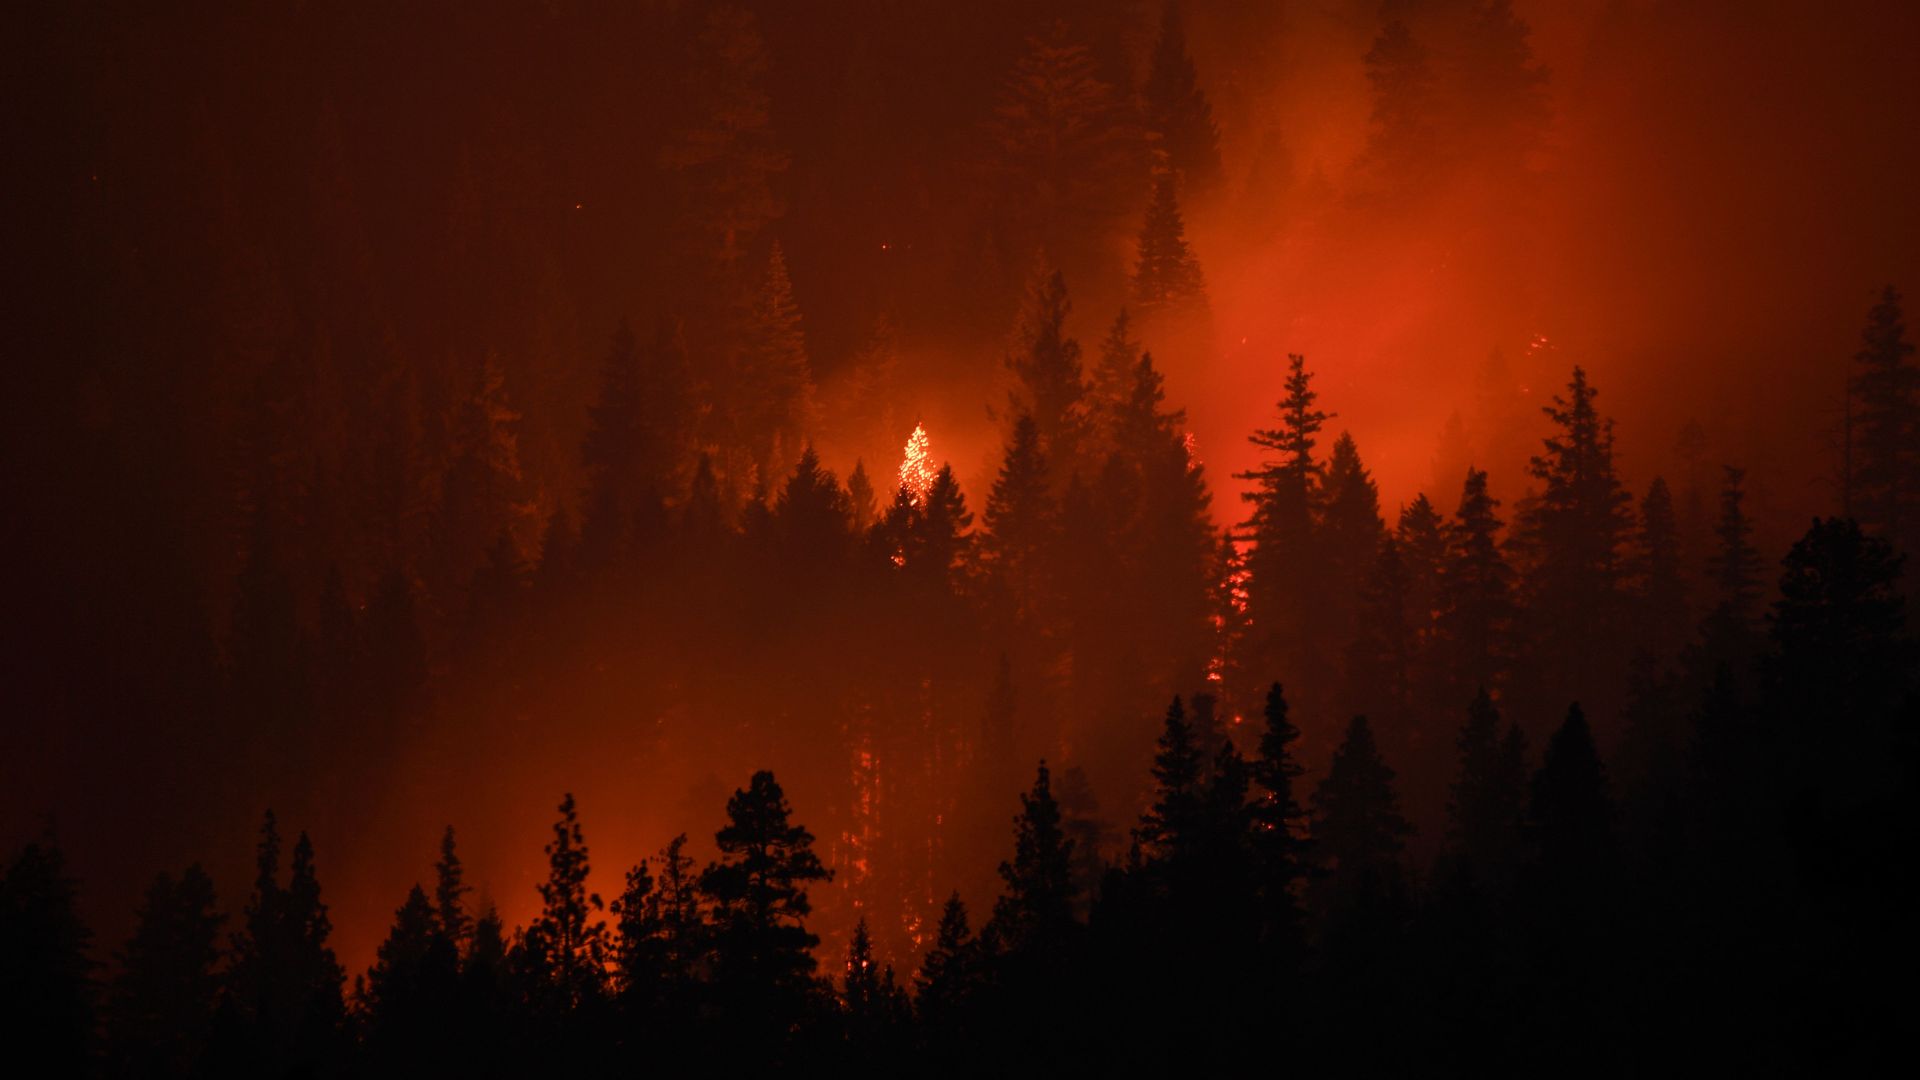 Plumes of wildfire smoke rise as trees burn during the Dixie Fire on August 18, 2021 near Susanville, California. 